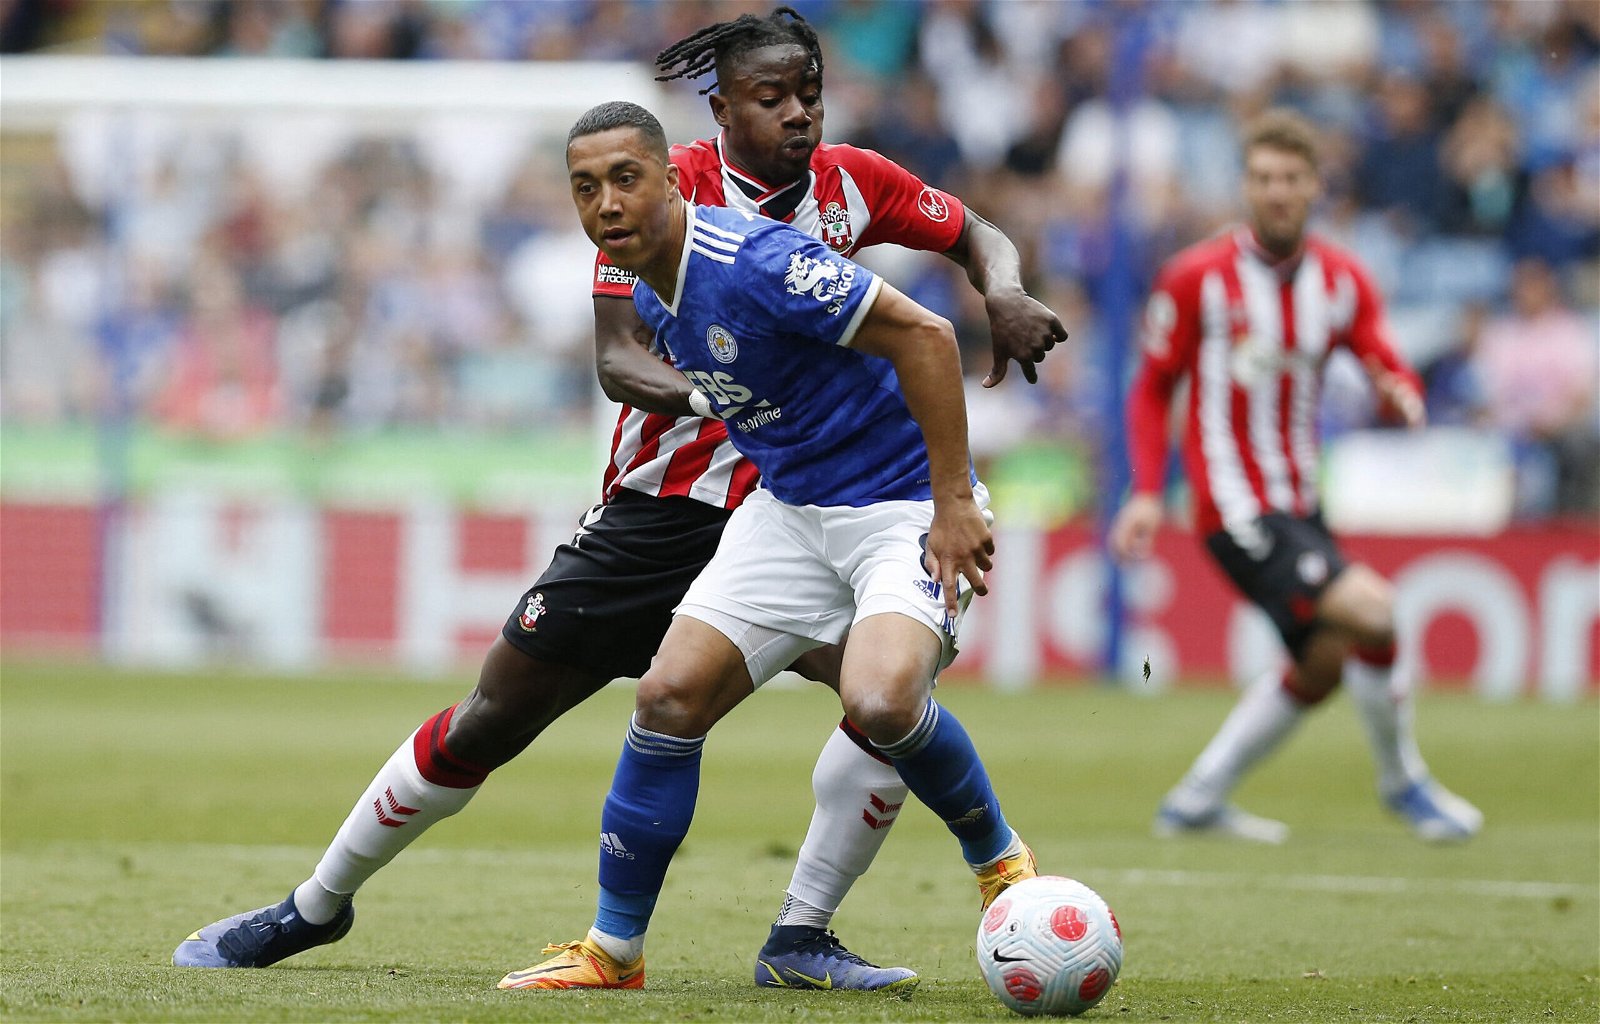 Youri-Tielemans-in-action-for-Leicester-City-against-Southampton-in-the-Premier-League